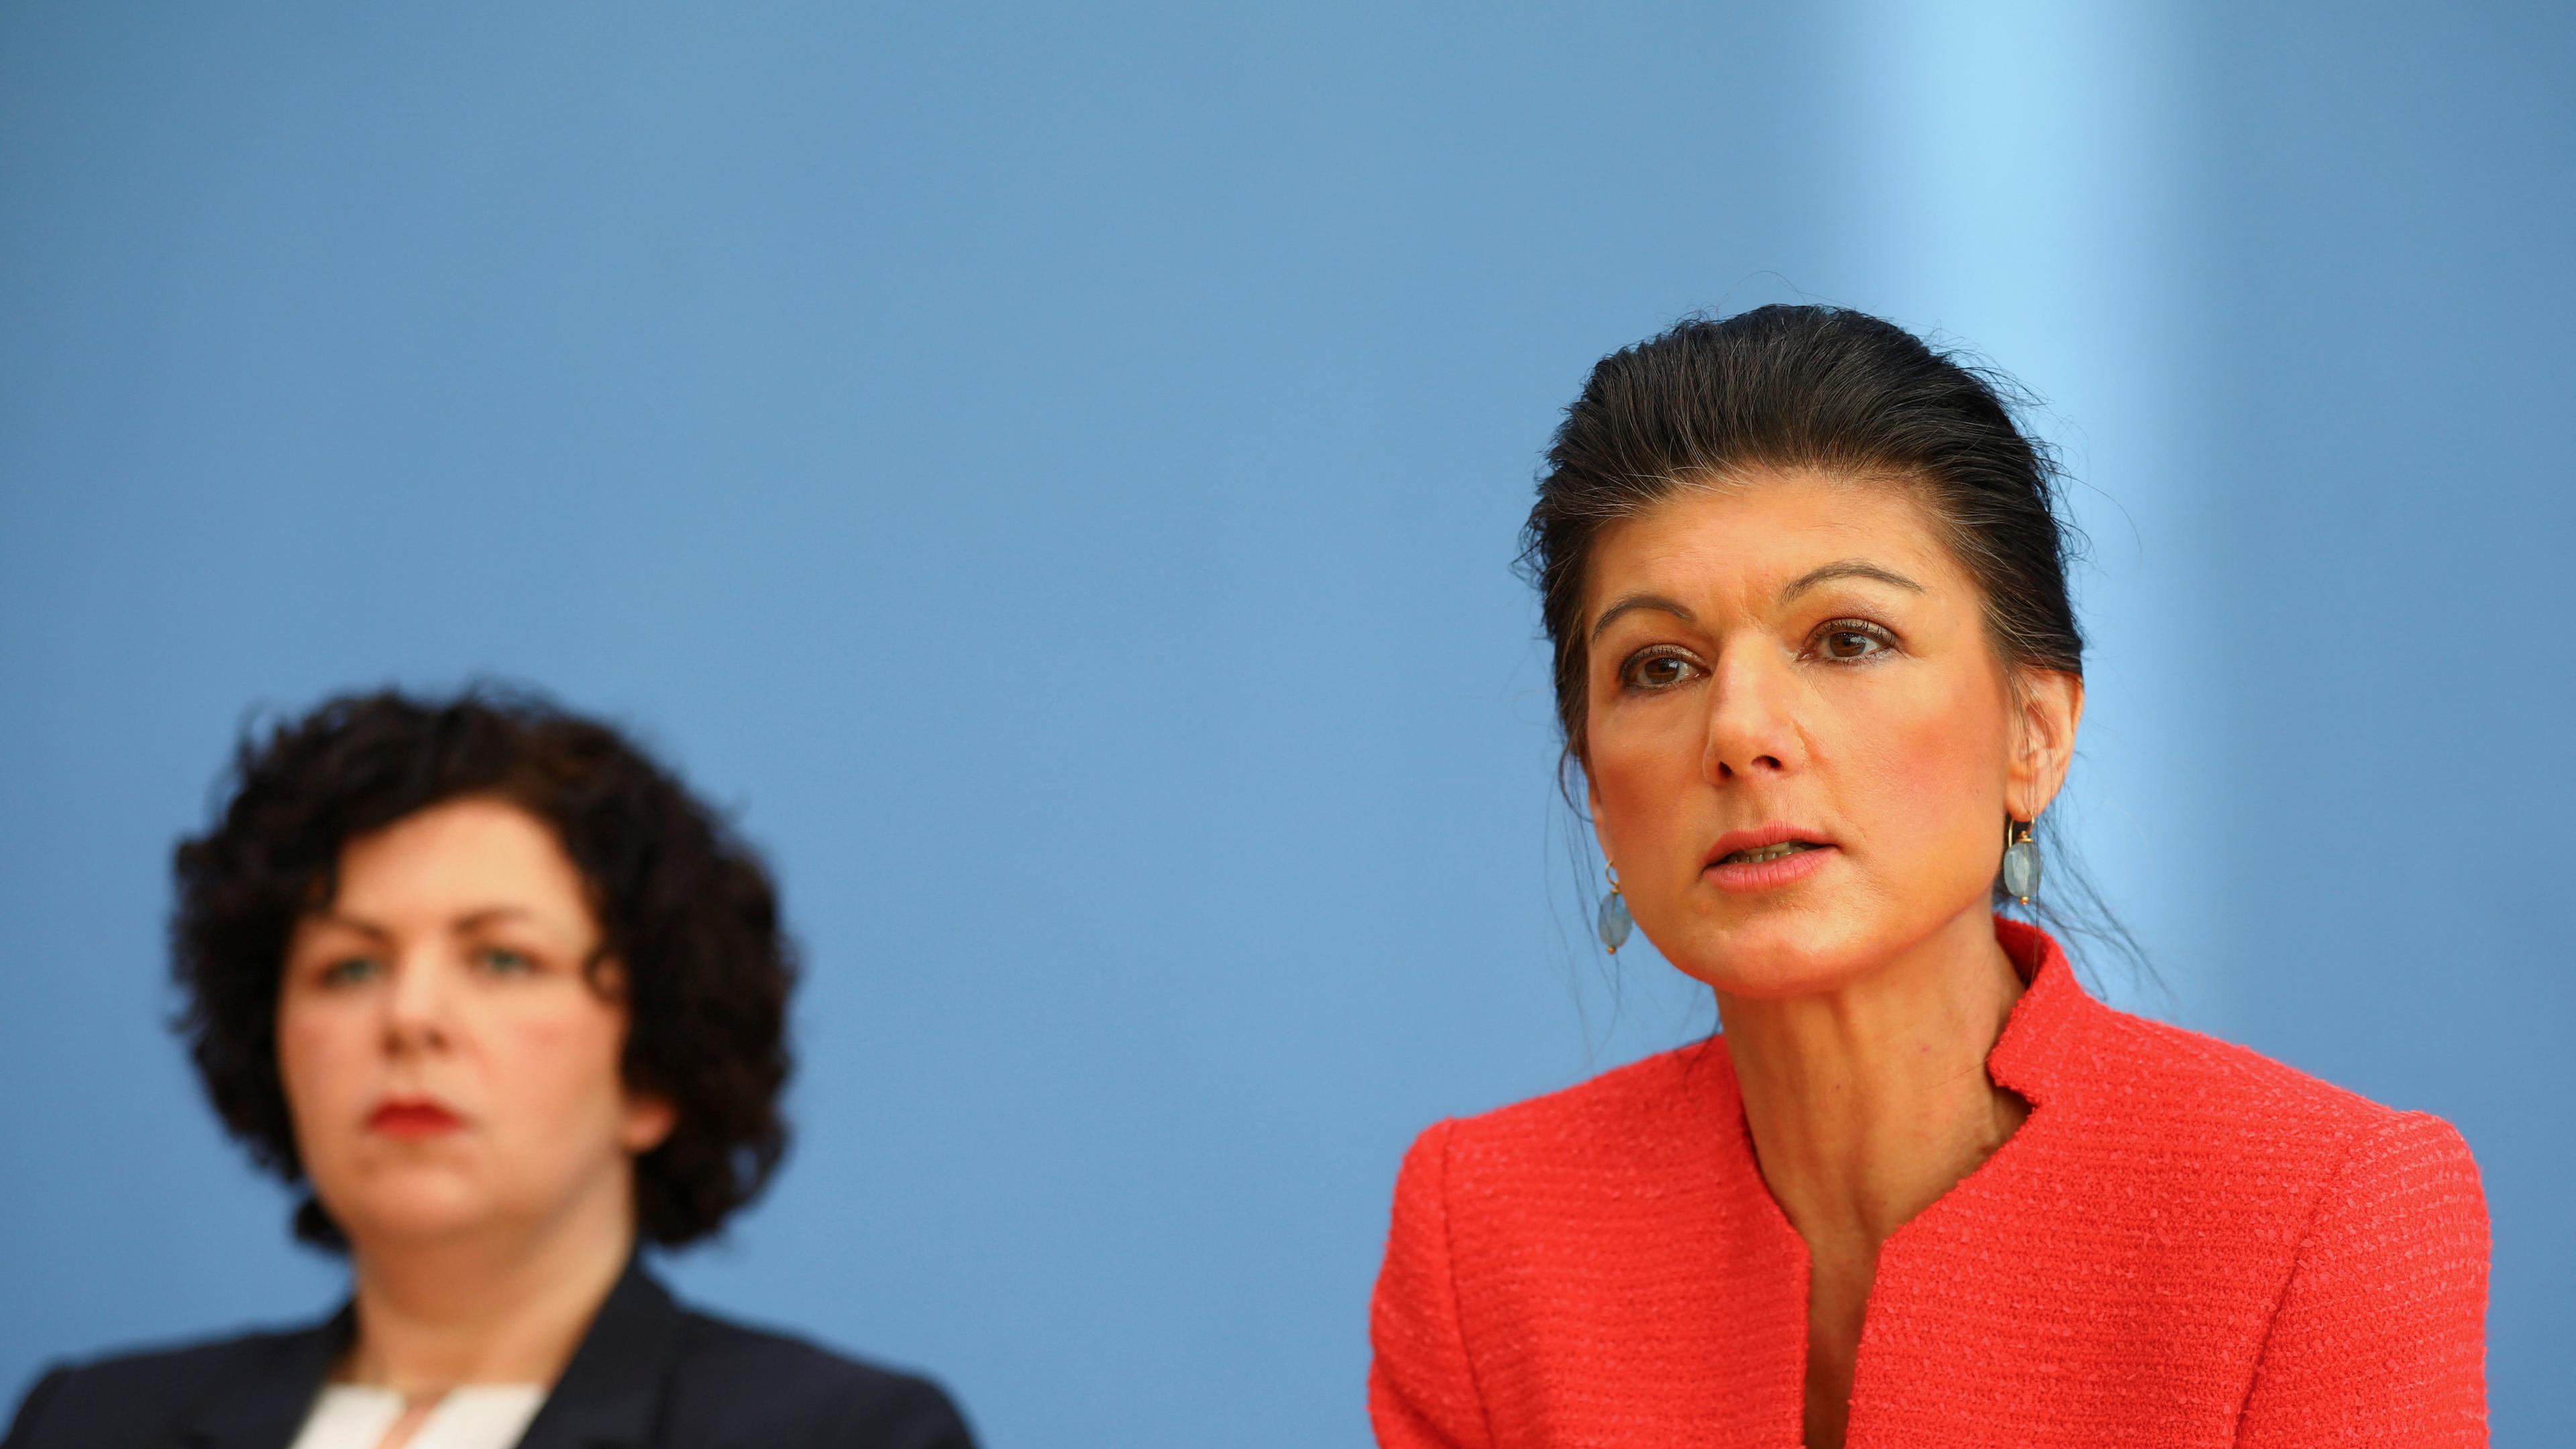 Sahra Wagenknecht addresses the media during the founding news conference of her new party in Berlin